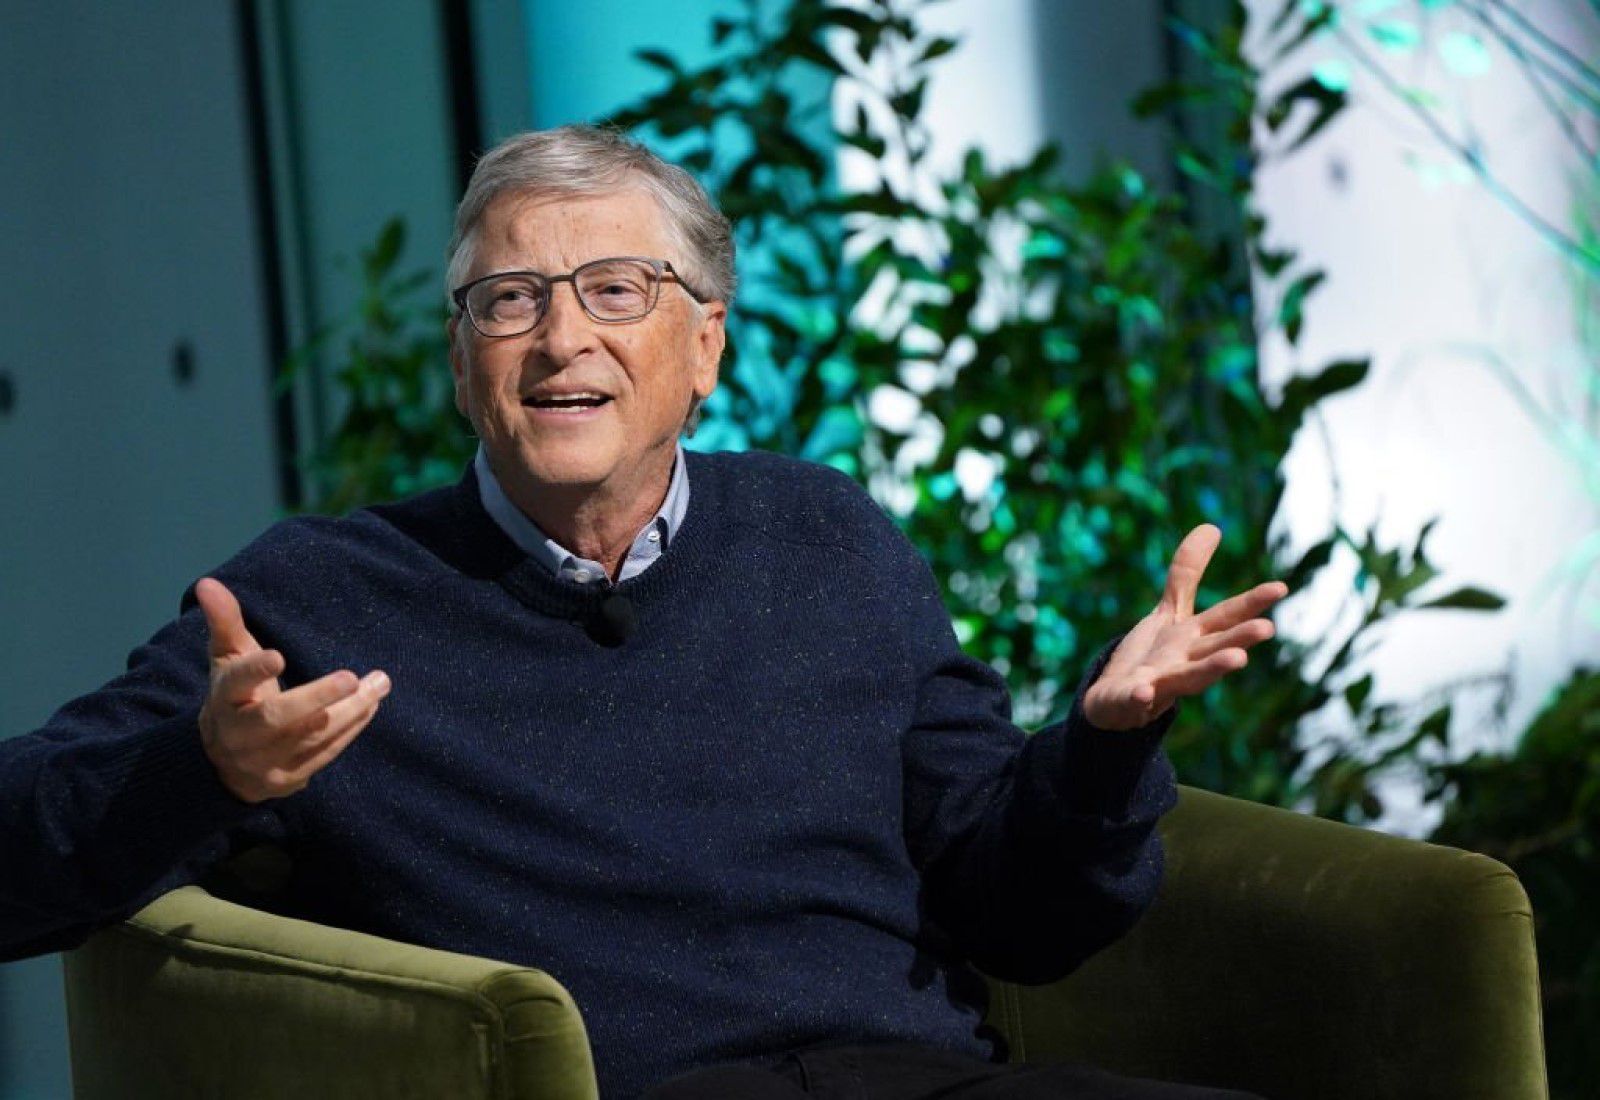 Bill Gates: Planting trees to solve the climate crisis is “complete nonsense”